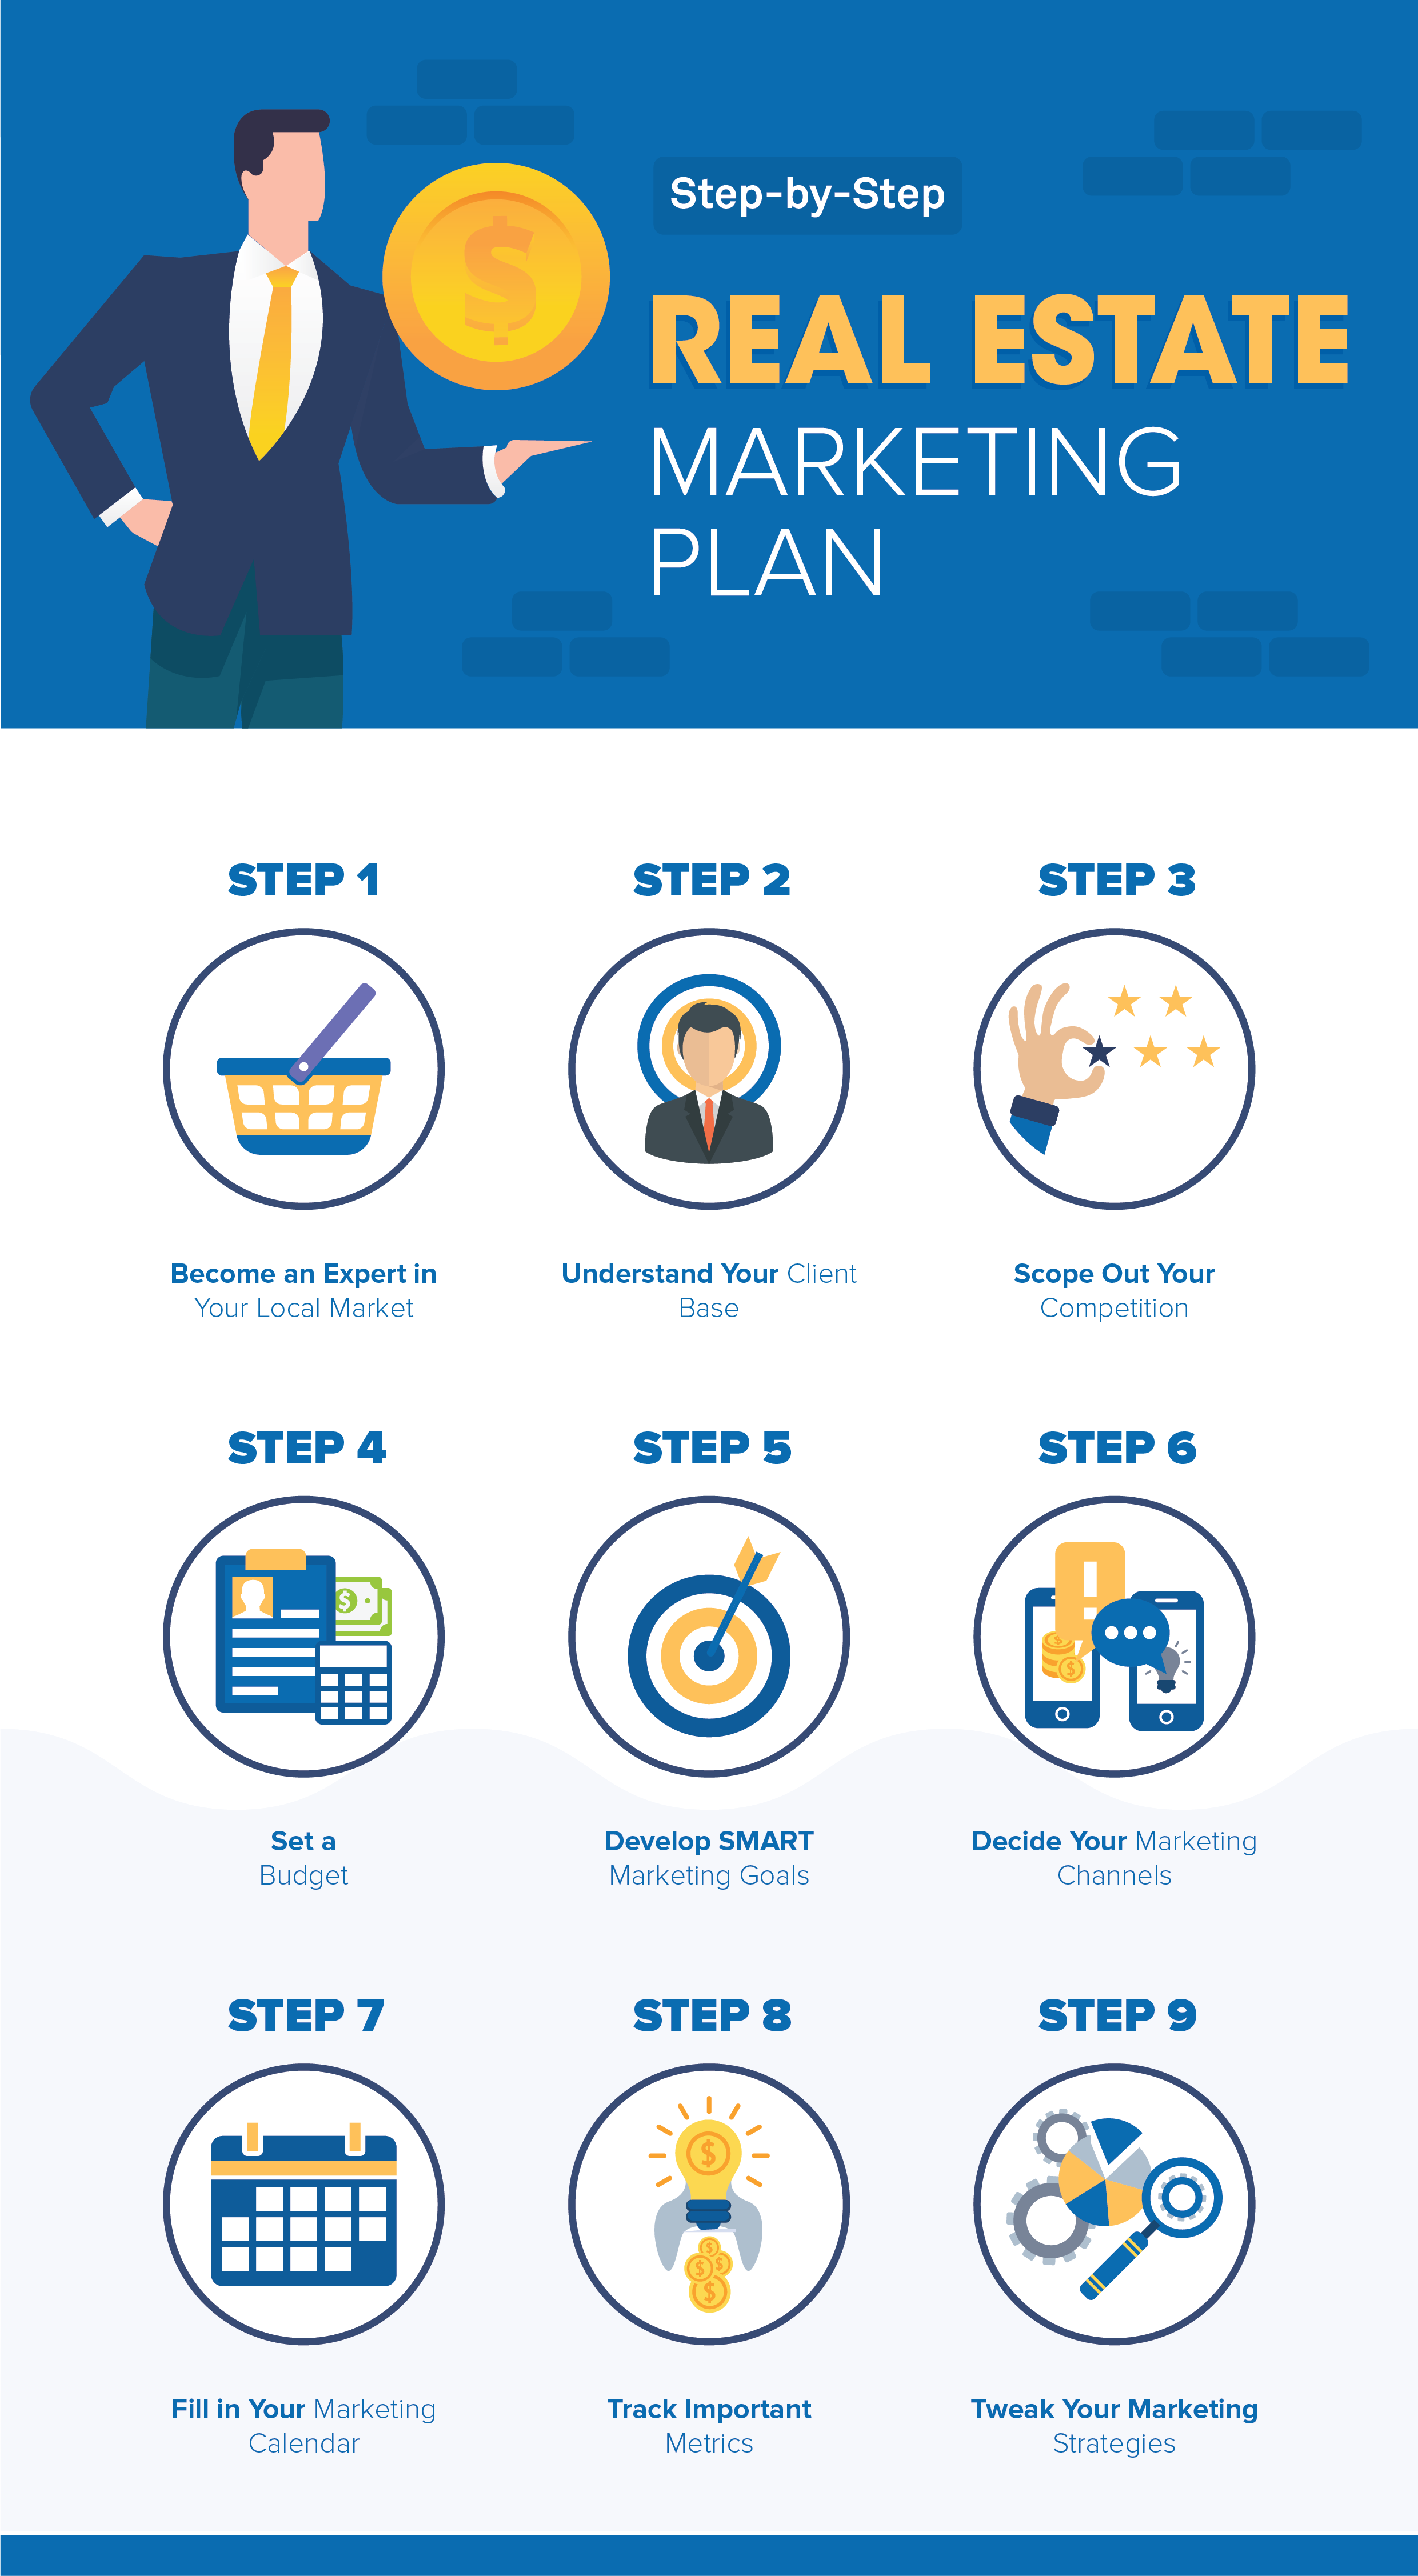 Infographic flow chart for a step-by-step real estate marketing timeline plan